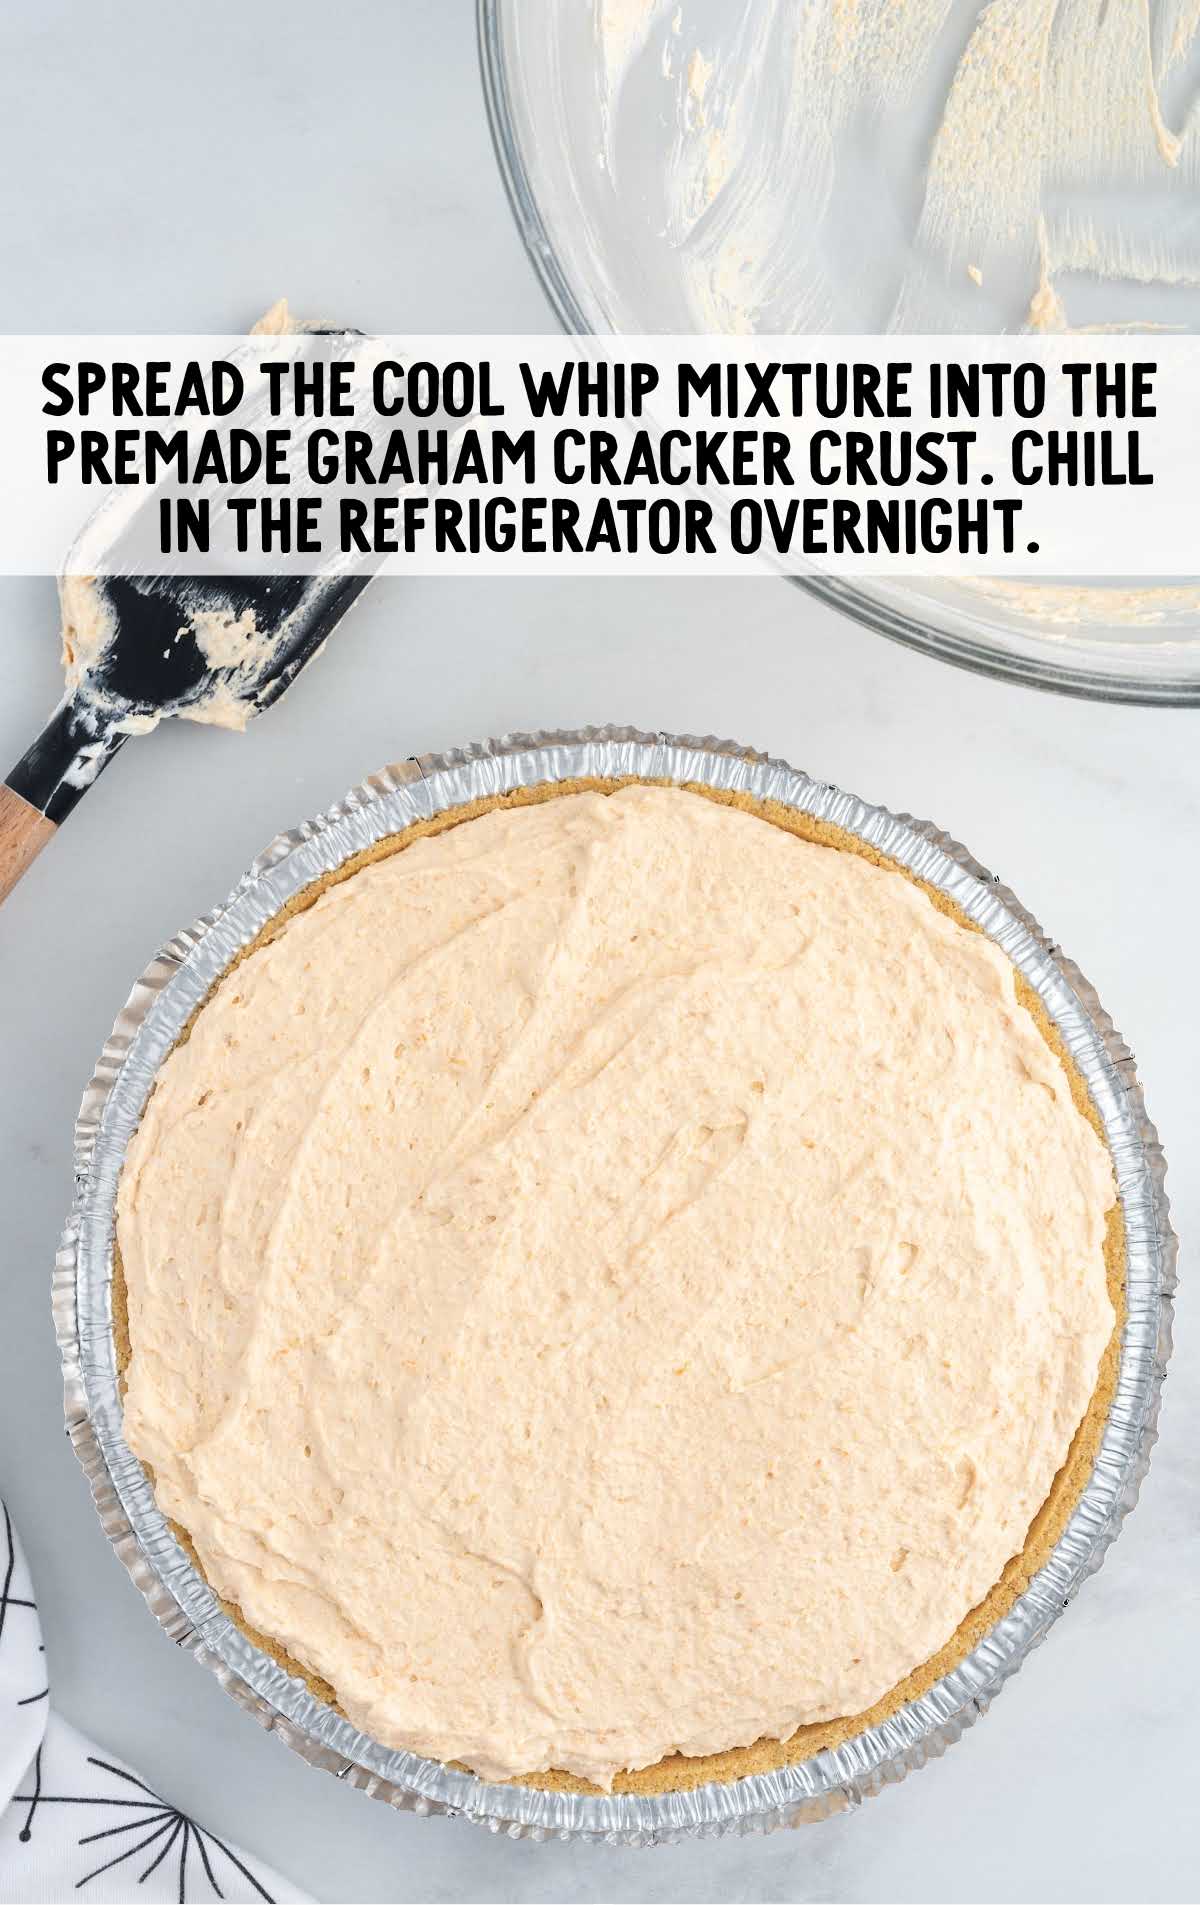 cool whipped mixture spread into the graham cracker crust